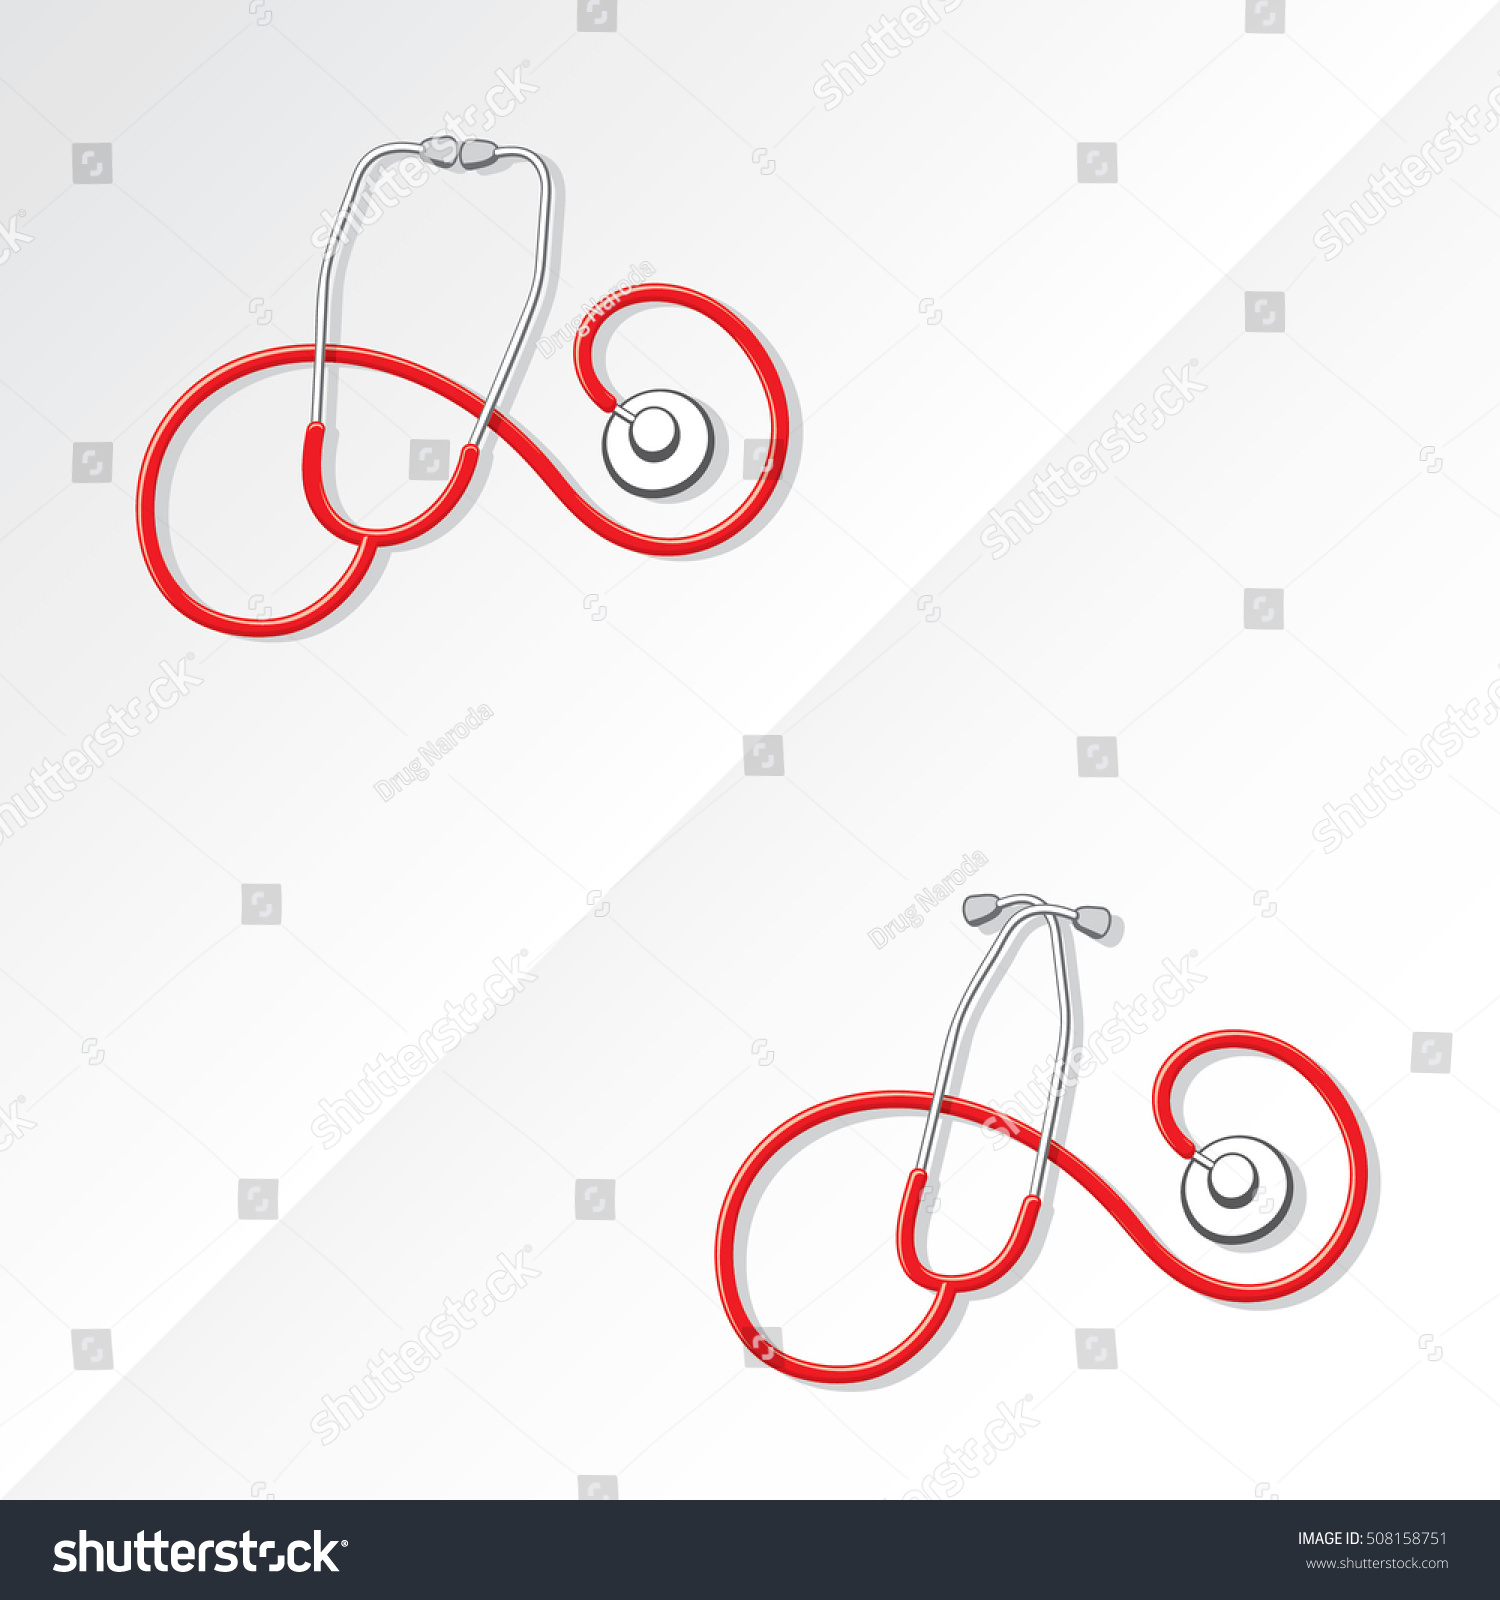 SVG of Two Medical Stethoscopes with Spiral Shape Tubing Icons Set One with Crossed Binaural Another with Eartips Put Together - Grayscale and Red Objects on White Background - Realistic Flat Design svg